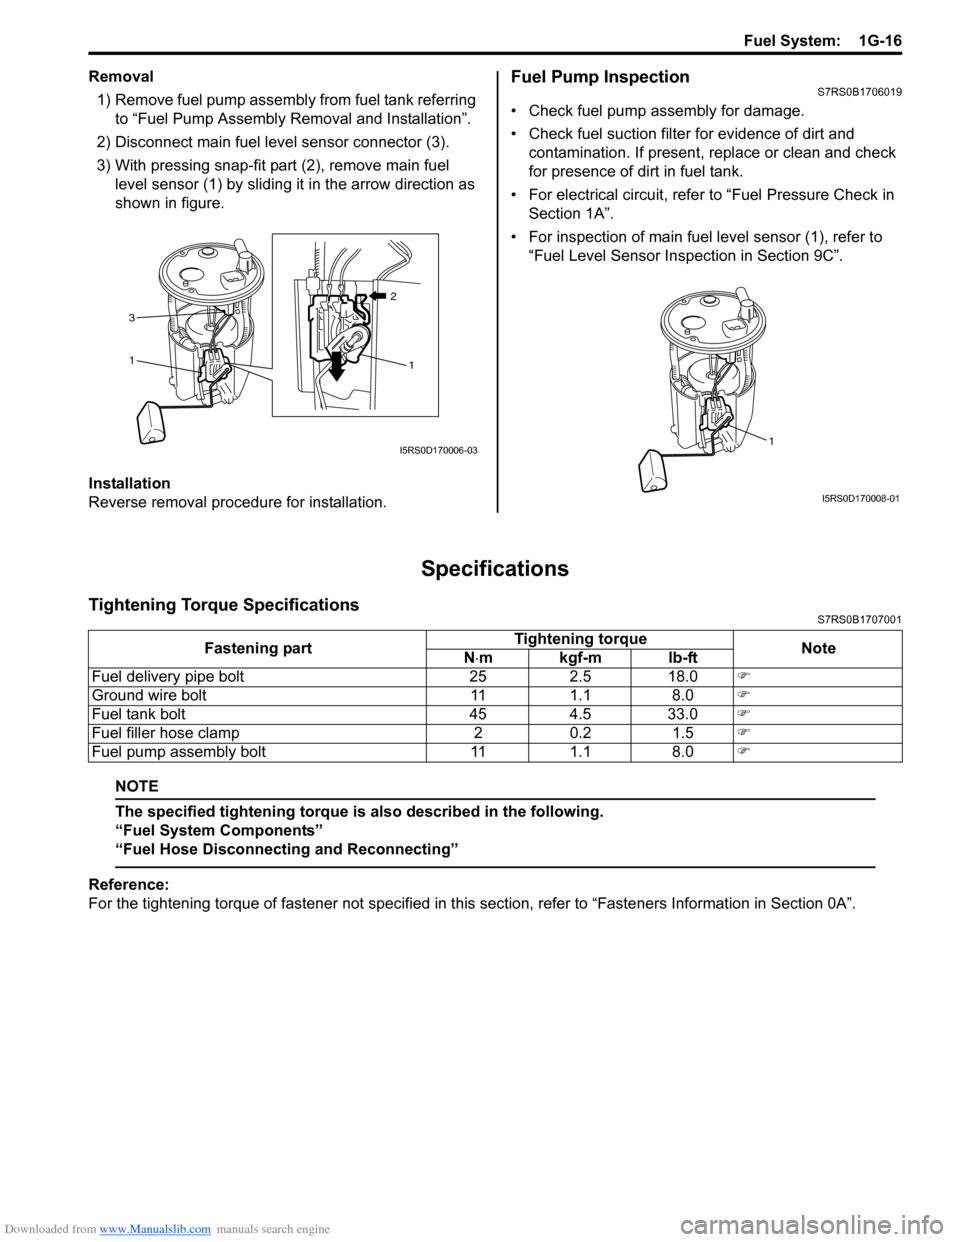 SUZUKI SWIFT 2006 2.G Service Workshop Manual Downloaded from www.Manualslib.com manuals search engine Fuel System:  1G-16
Removal1) Remove fuel pump assembly from fuel tank referring  to “Fuel Pump Assembly Removal and Installation”.
2) Disc